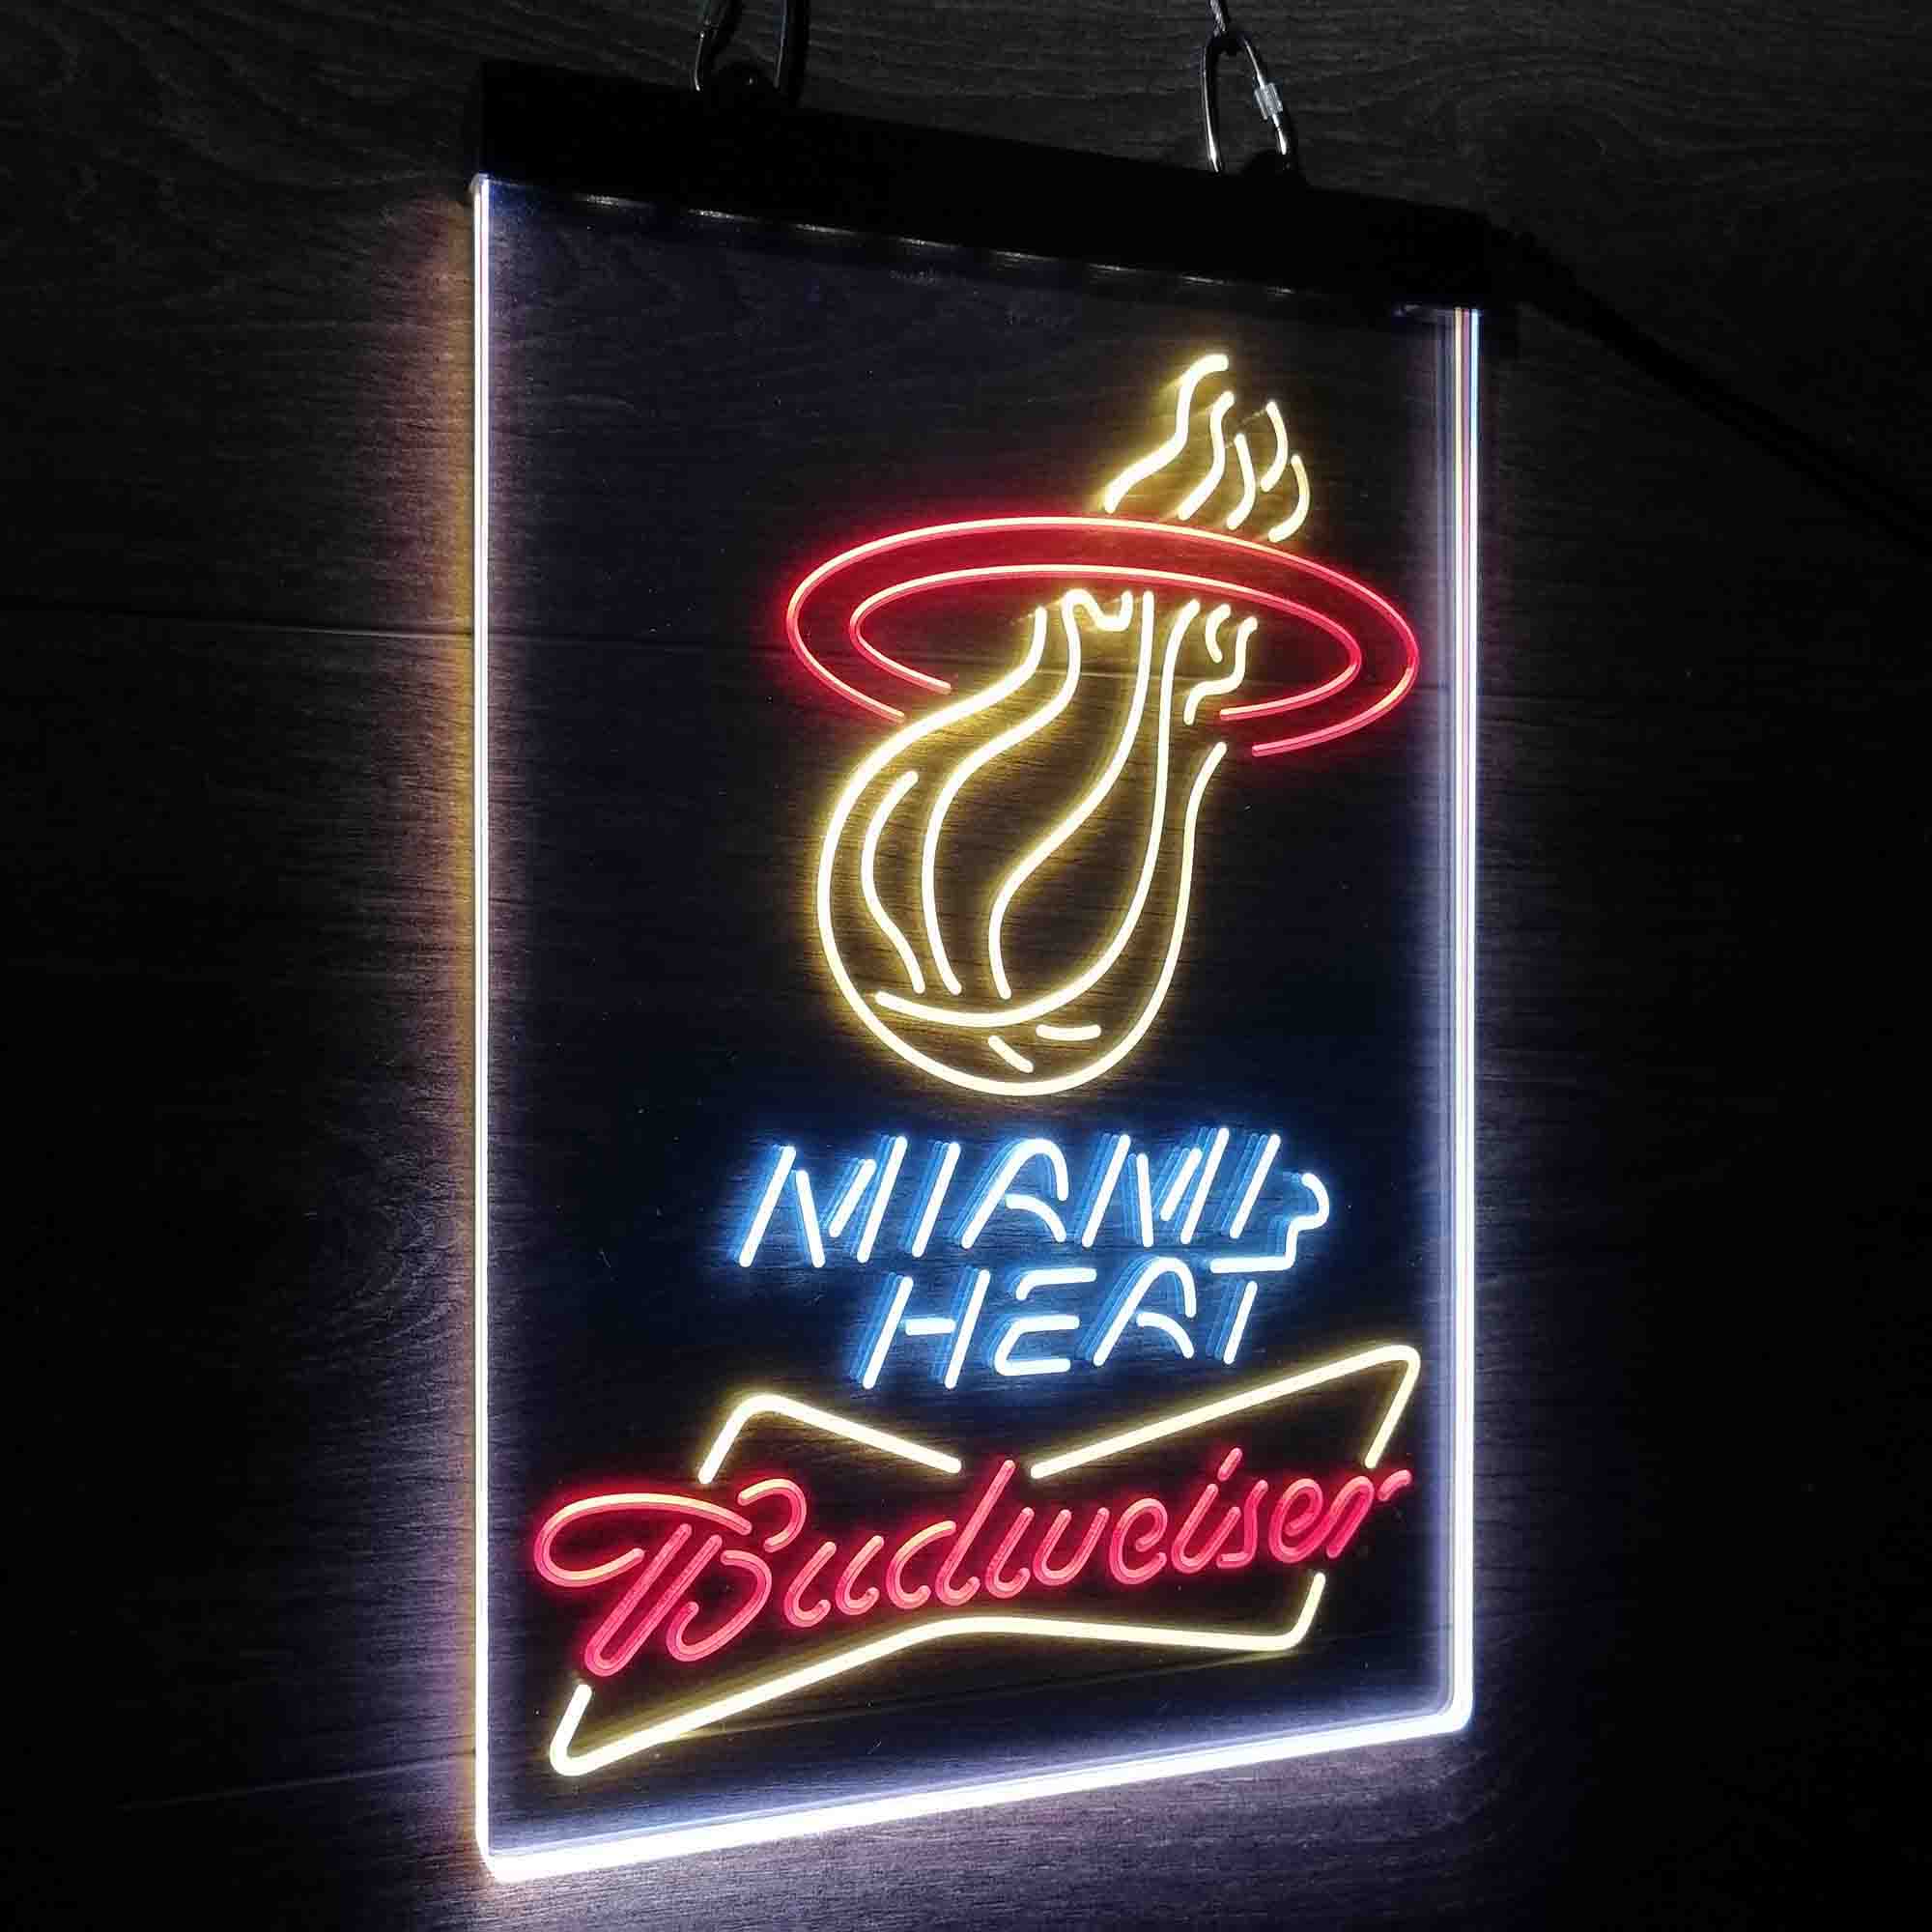 Miami Heat Nba Budweiser Neon LED Sign 3 Colors